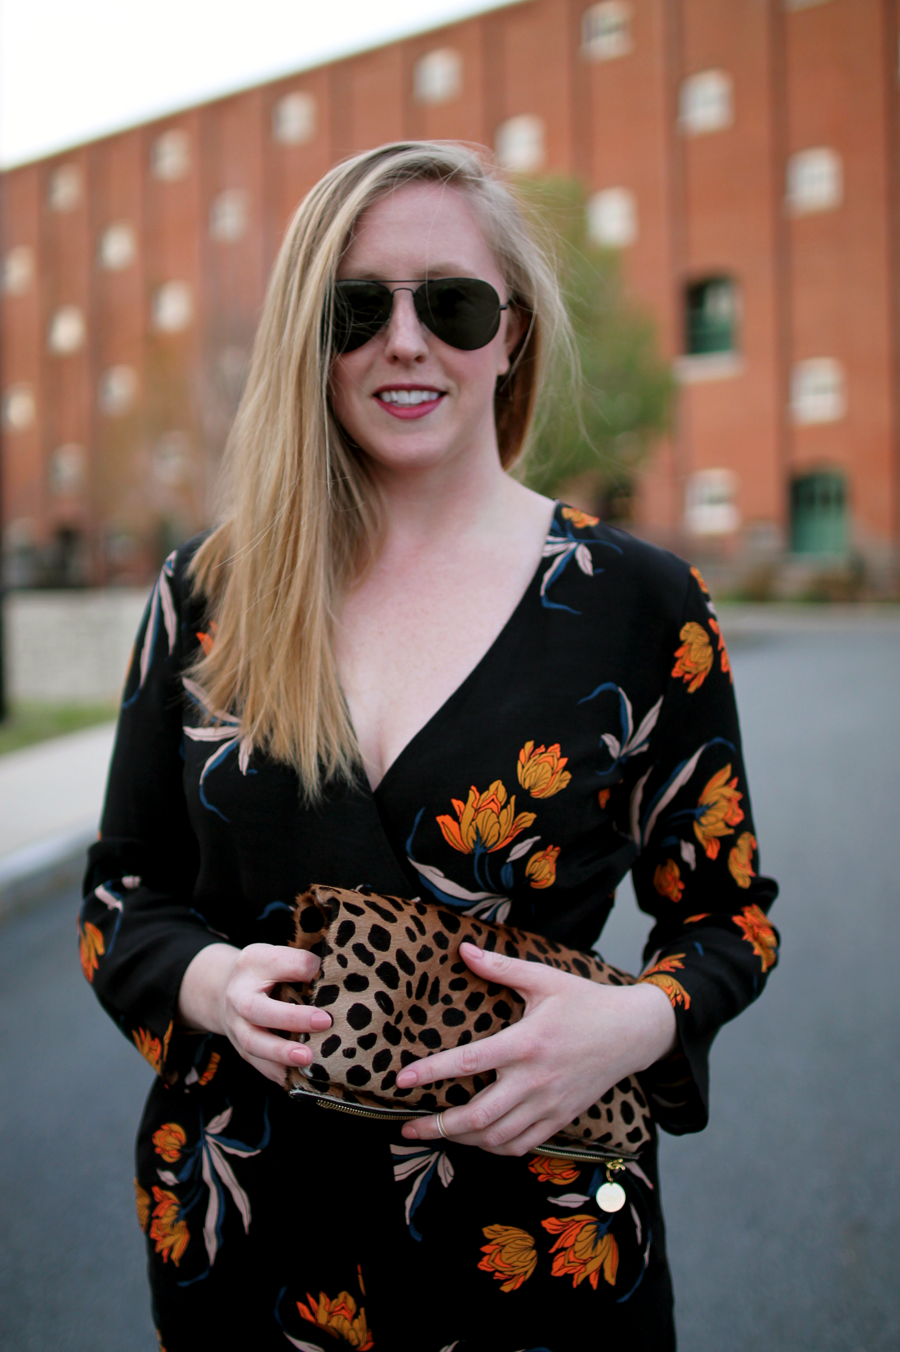 jumpsuit wedding wear, how to wear a jumpsuit, jumpsuit to a wedding, what i wore, boston style blogger, clare v folderover clutch, boston blogger spring, my style diary, topshop printed jumpsuit